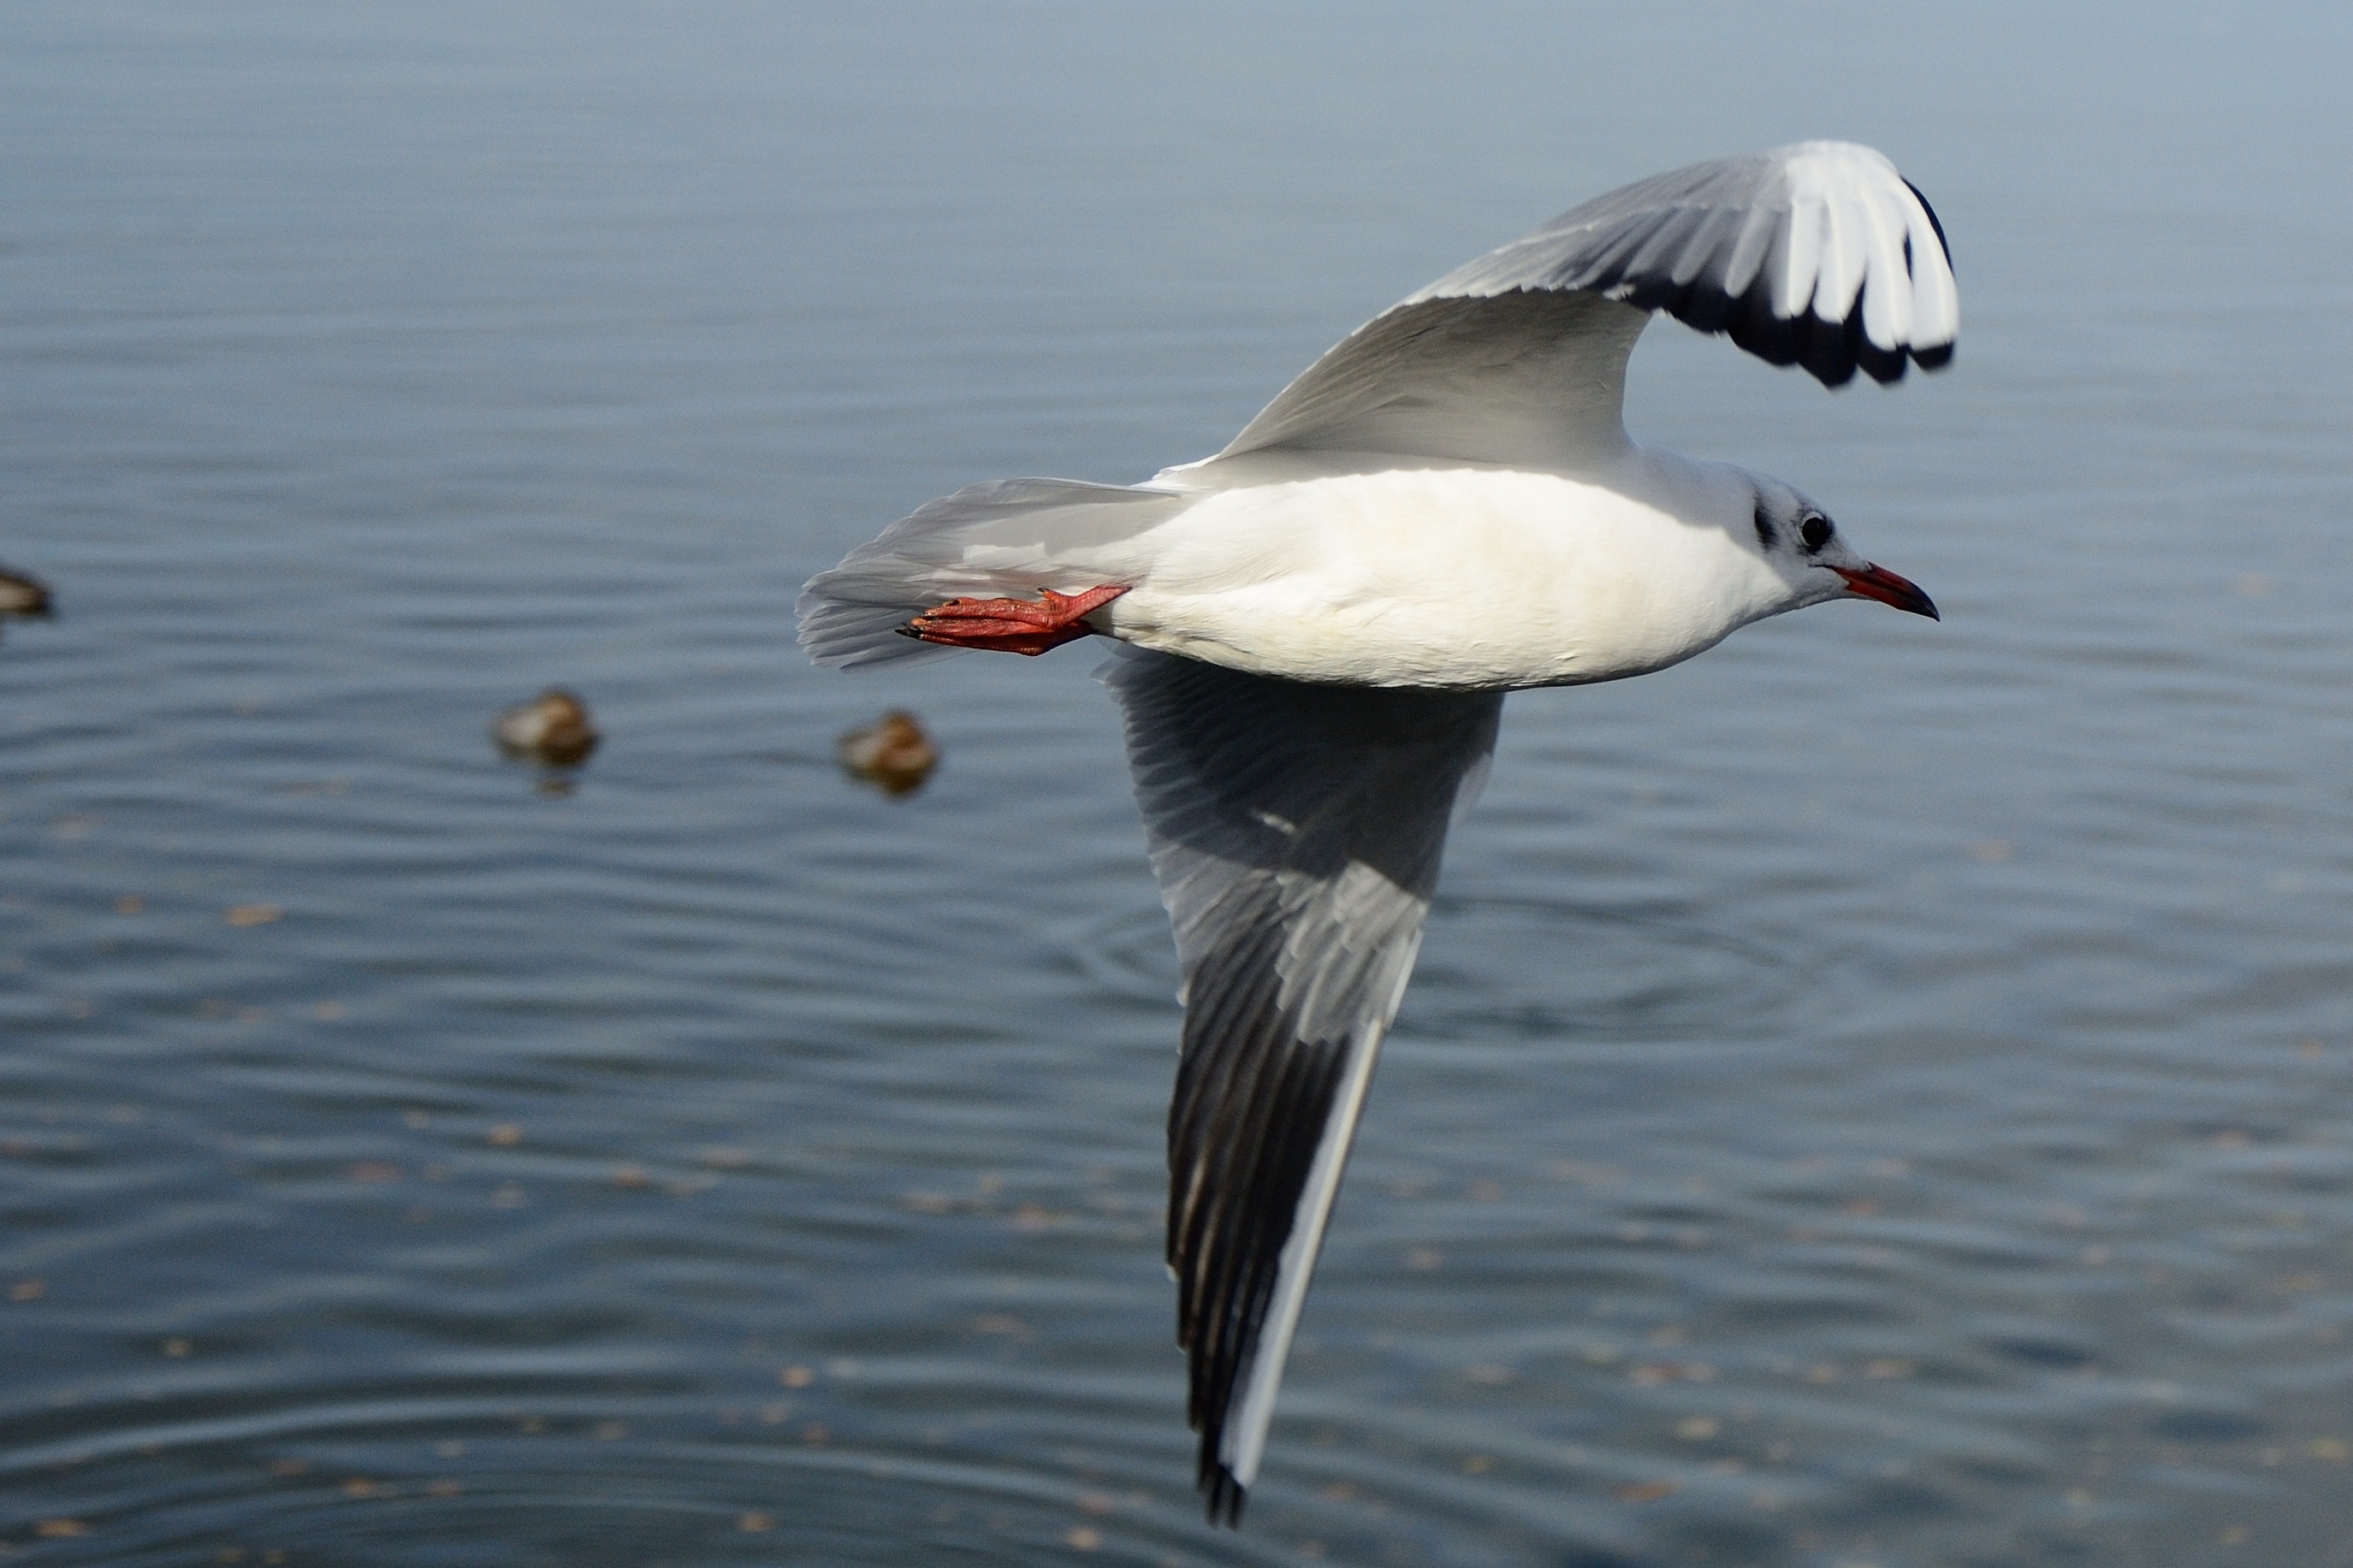 white and gray bird flying over body of water